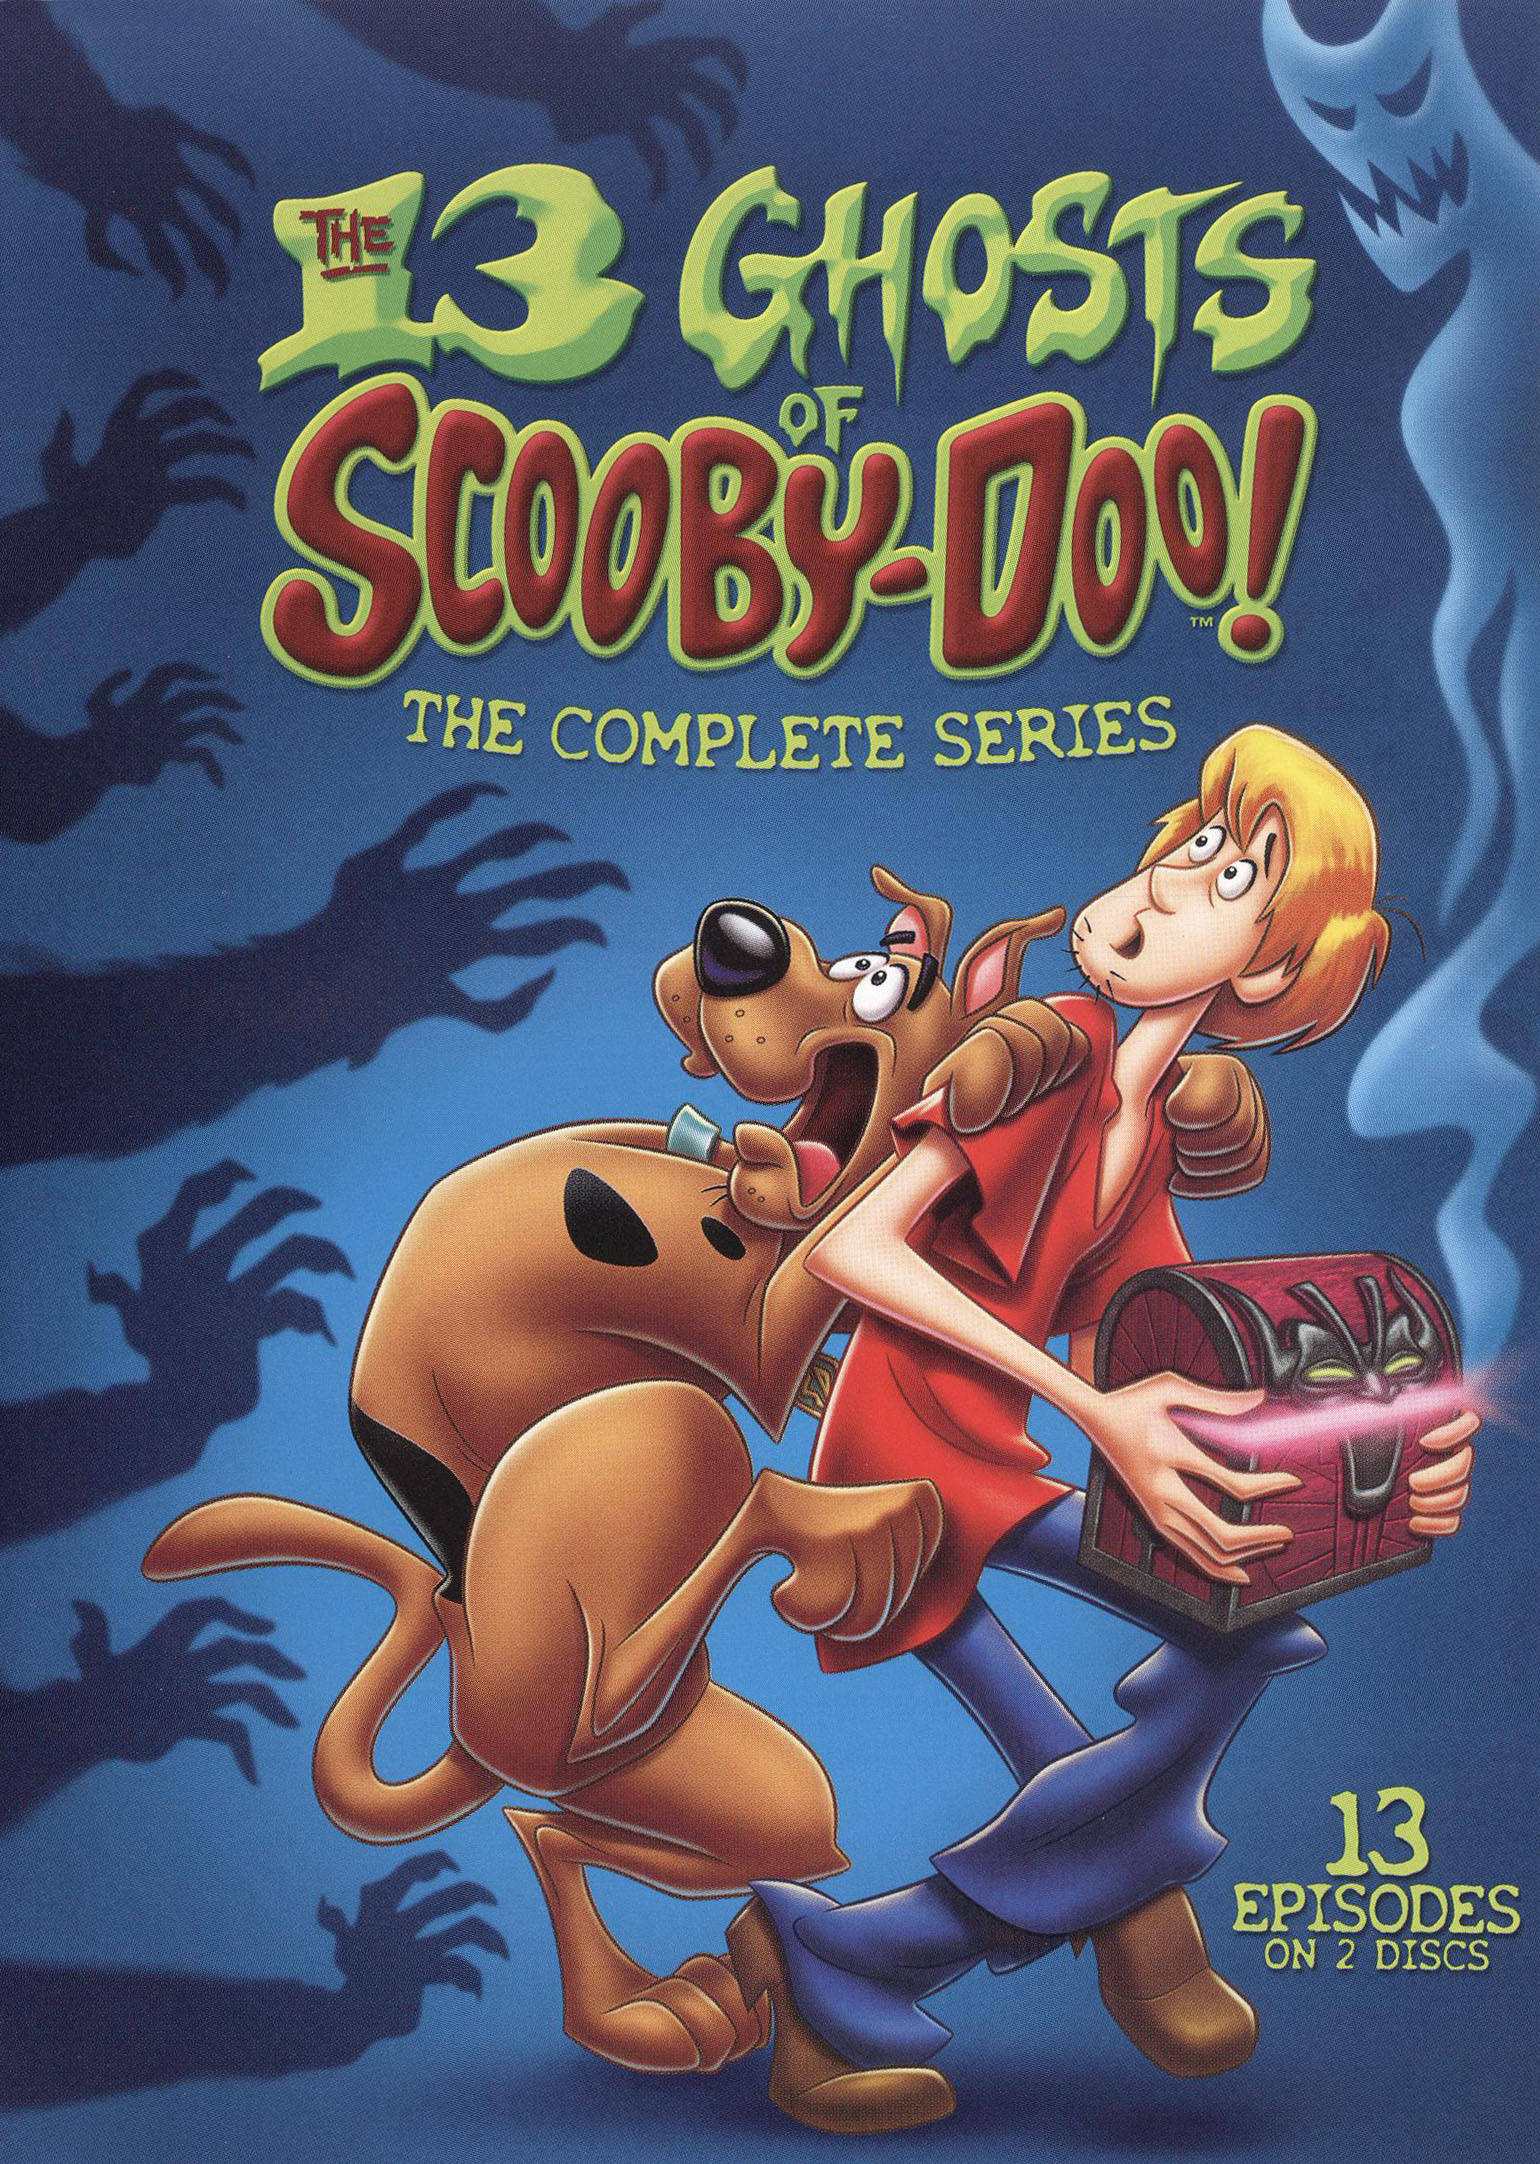 Watch The 13 Ghosts of Scooby-Doo - Free TV Shows